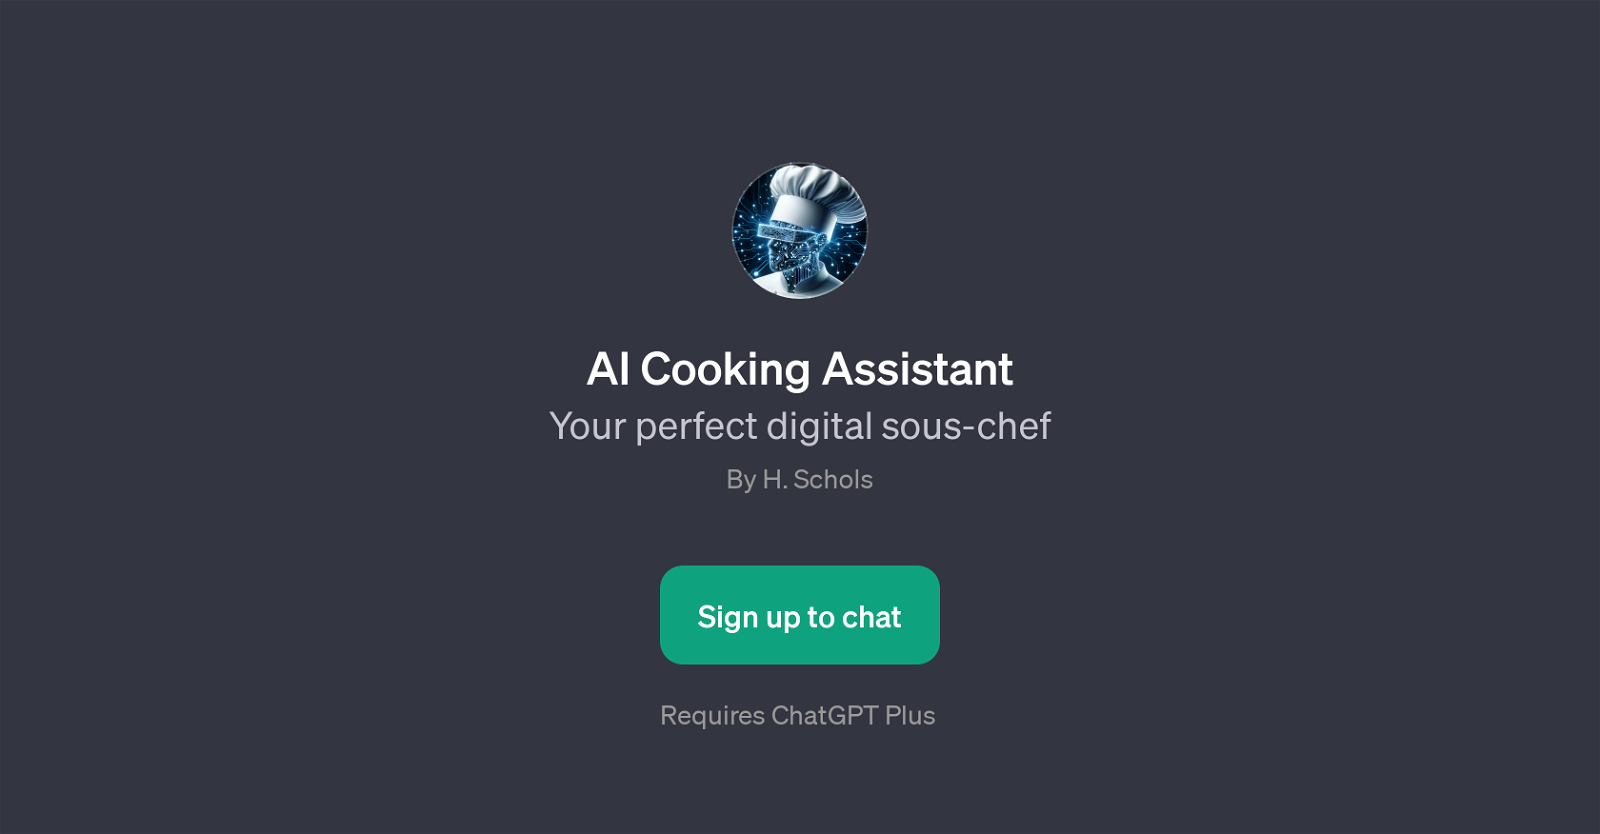 AI Cooking Assistant website